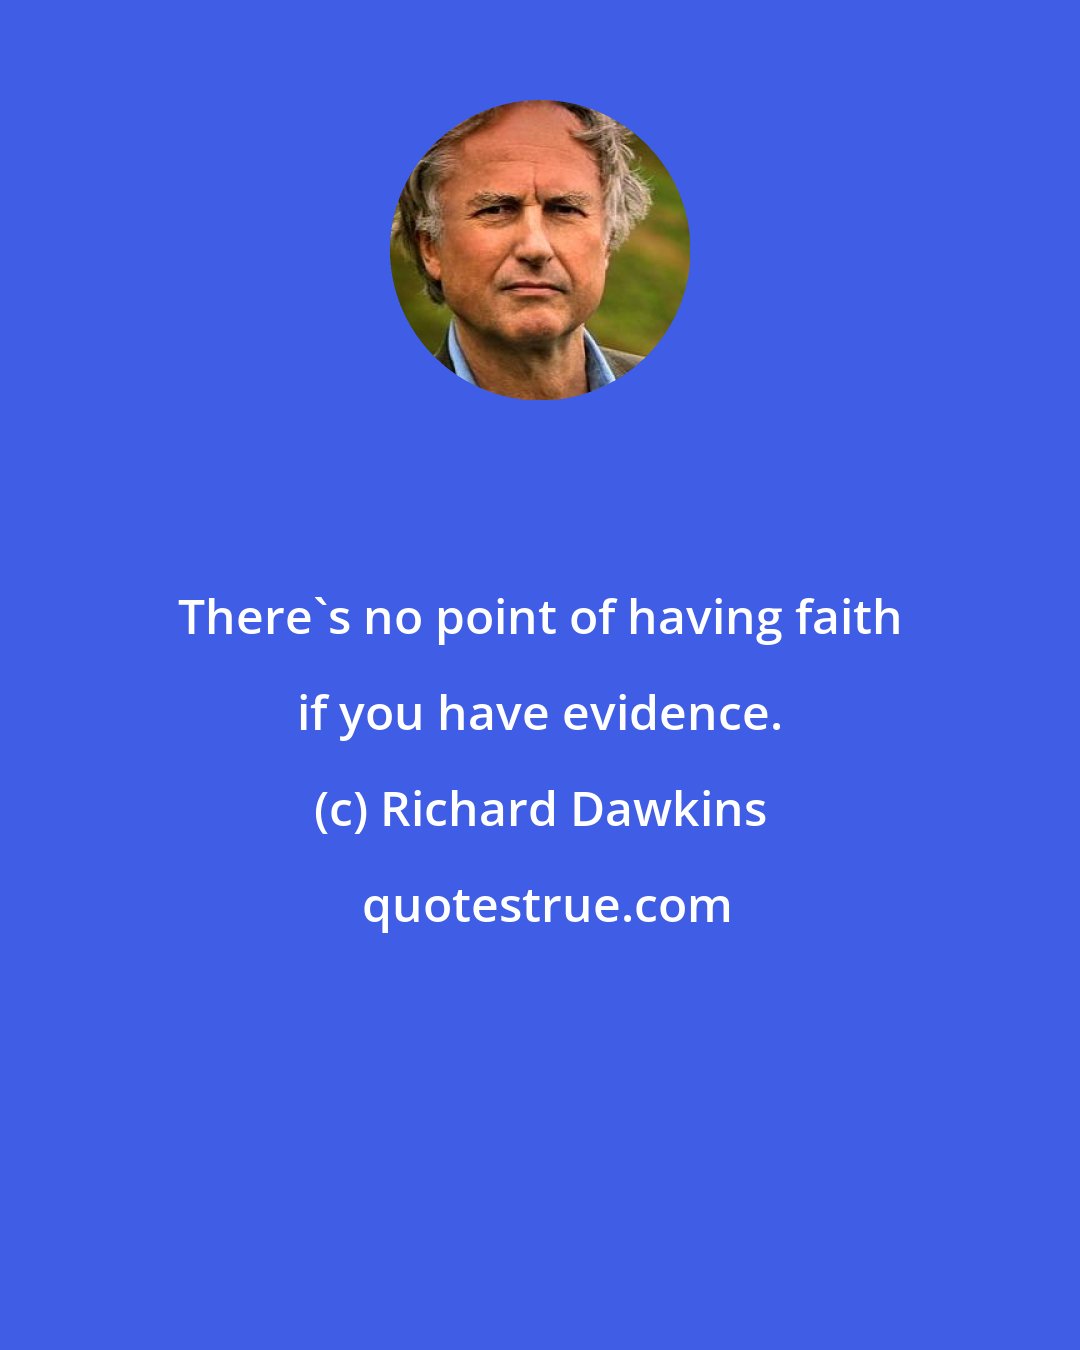 Richard Dawkins: There's no point of having faith if you have evidence.